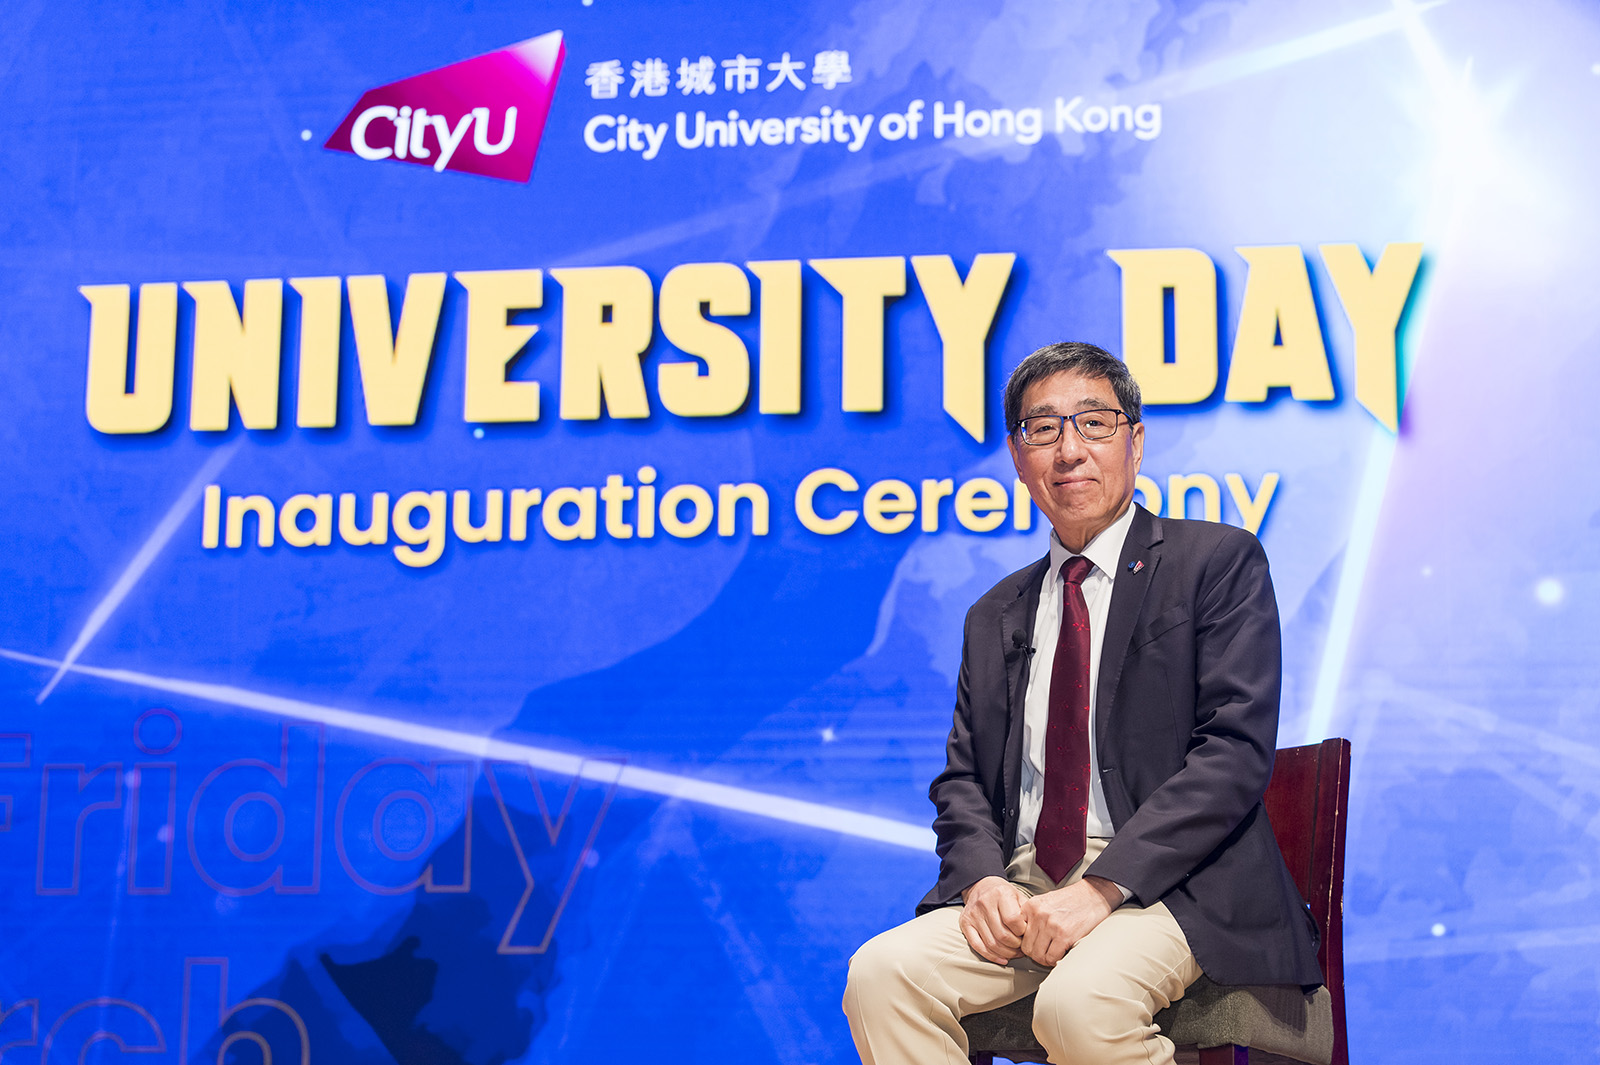 resident Kuo says U-Day aims to communicate to the community more about our very special brand, and share and celebrate the CityU’s remarkable accomplishment.